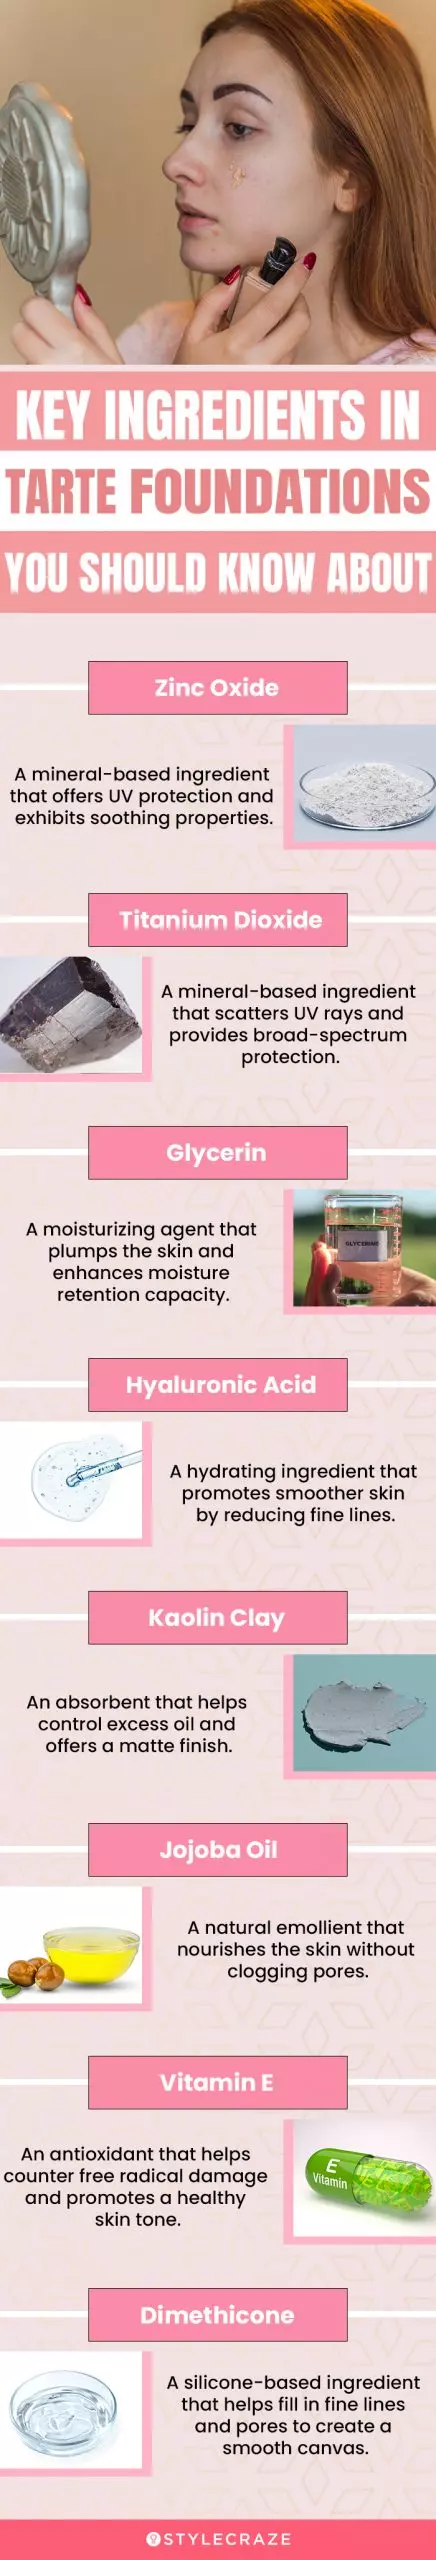 Key Ingredients In Tarte Foundations (infographic)